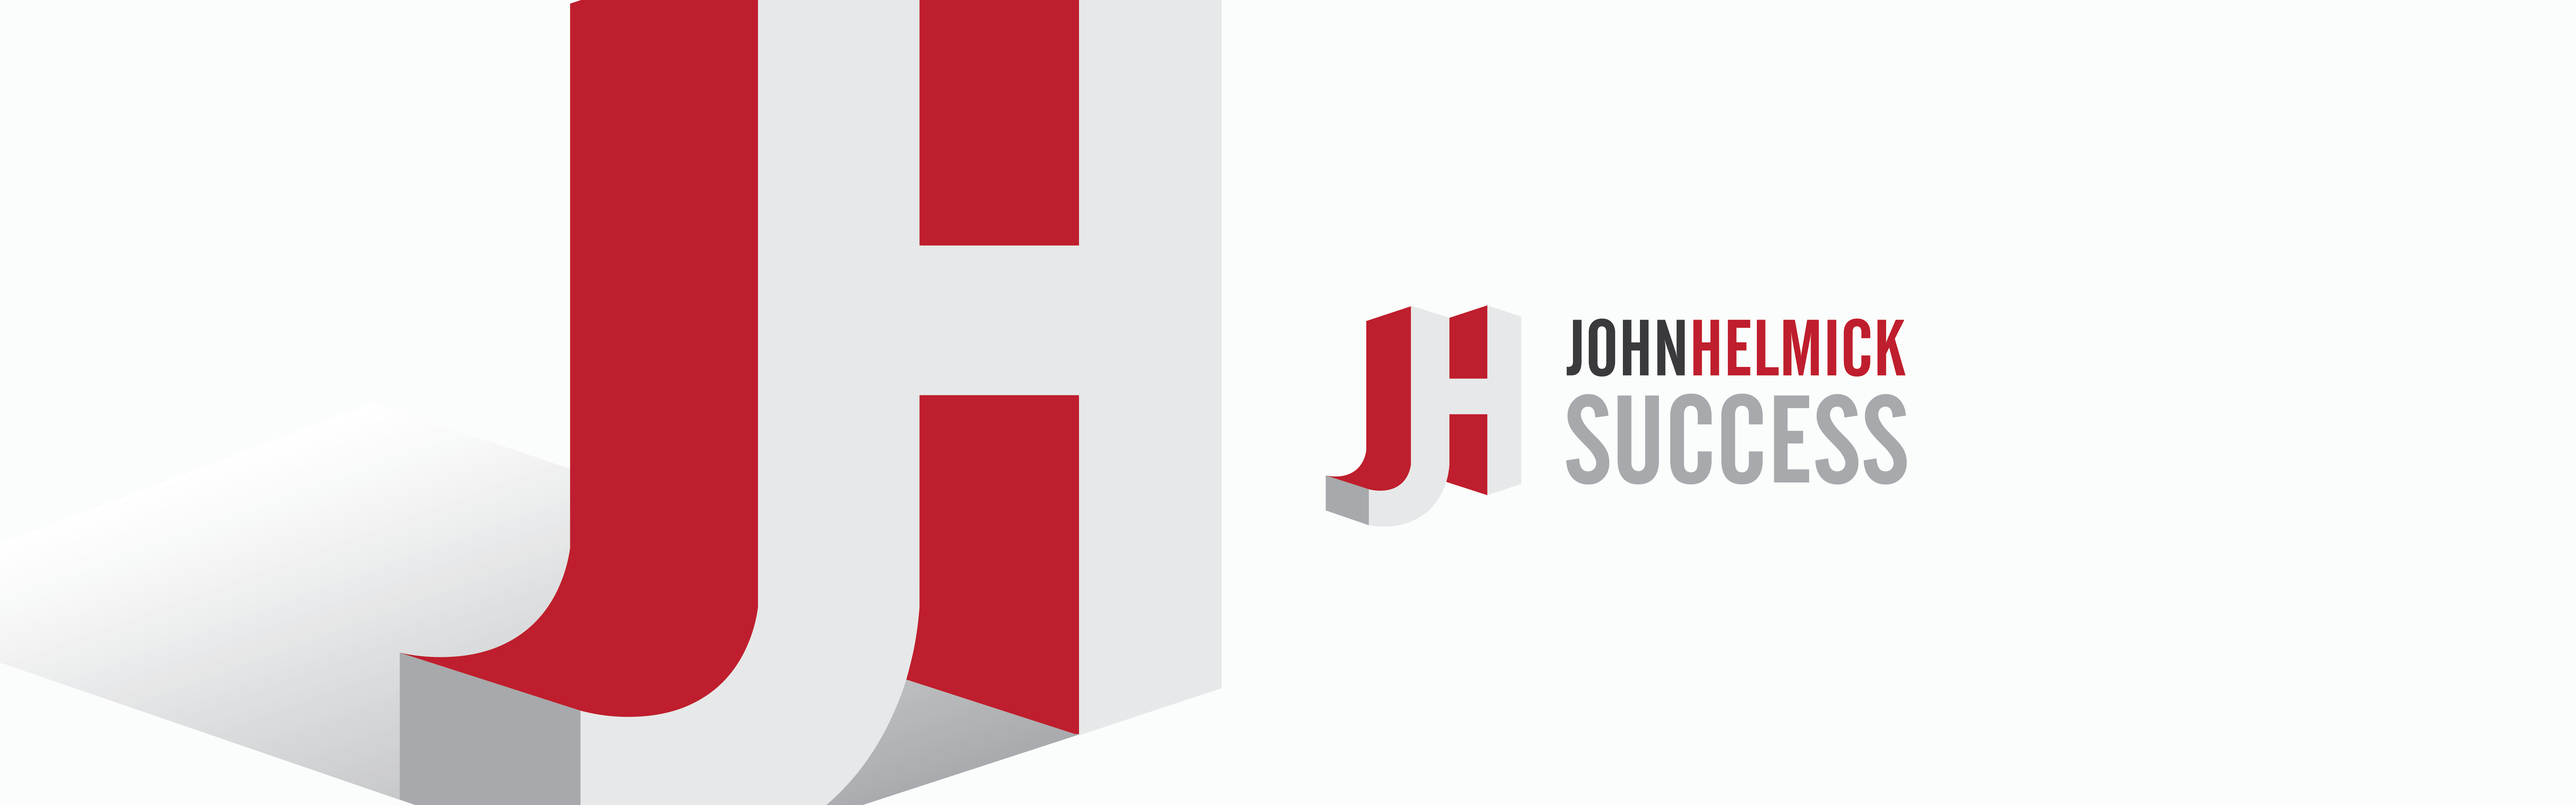 The image shows a graphic design featuring a large letter "j" in red on a white background, with a smaller "j" and the words "John Helmick Success" adjacent to it.